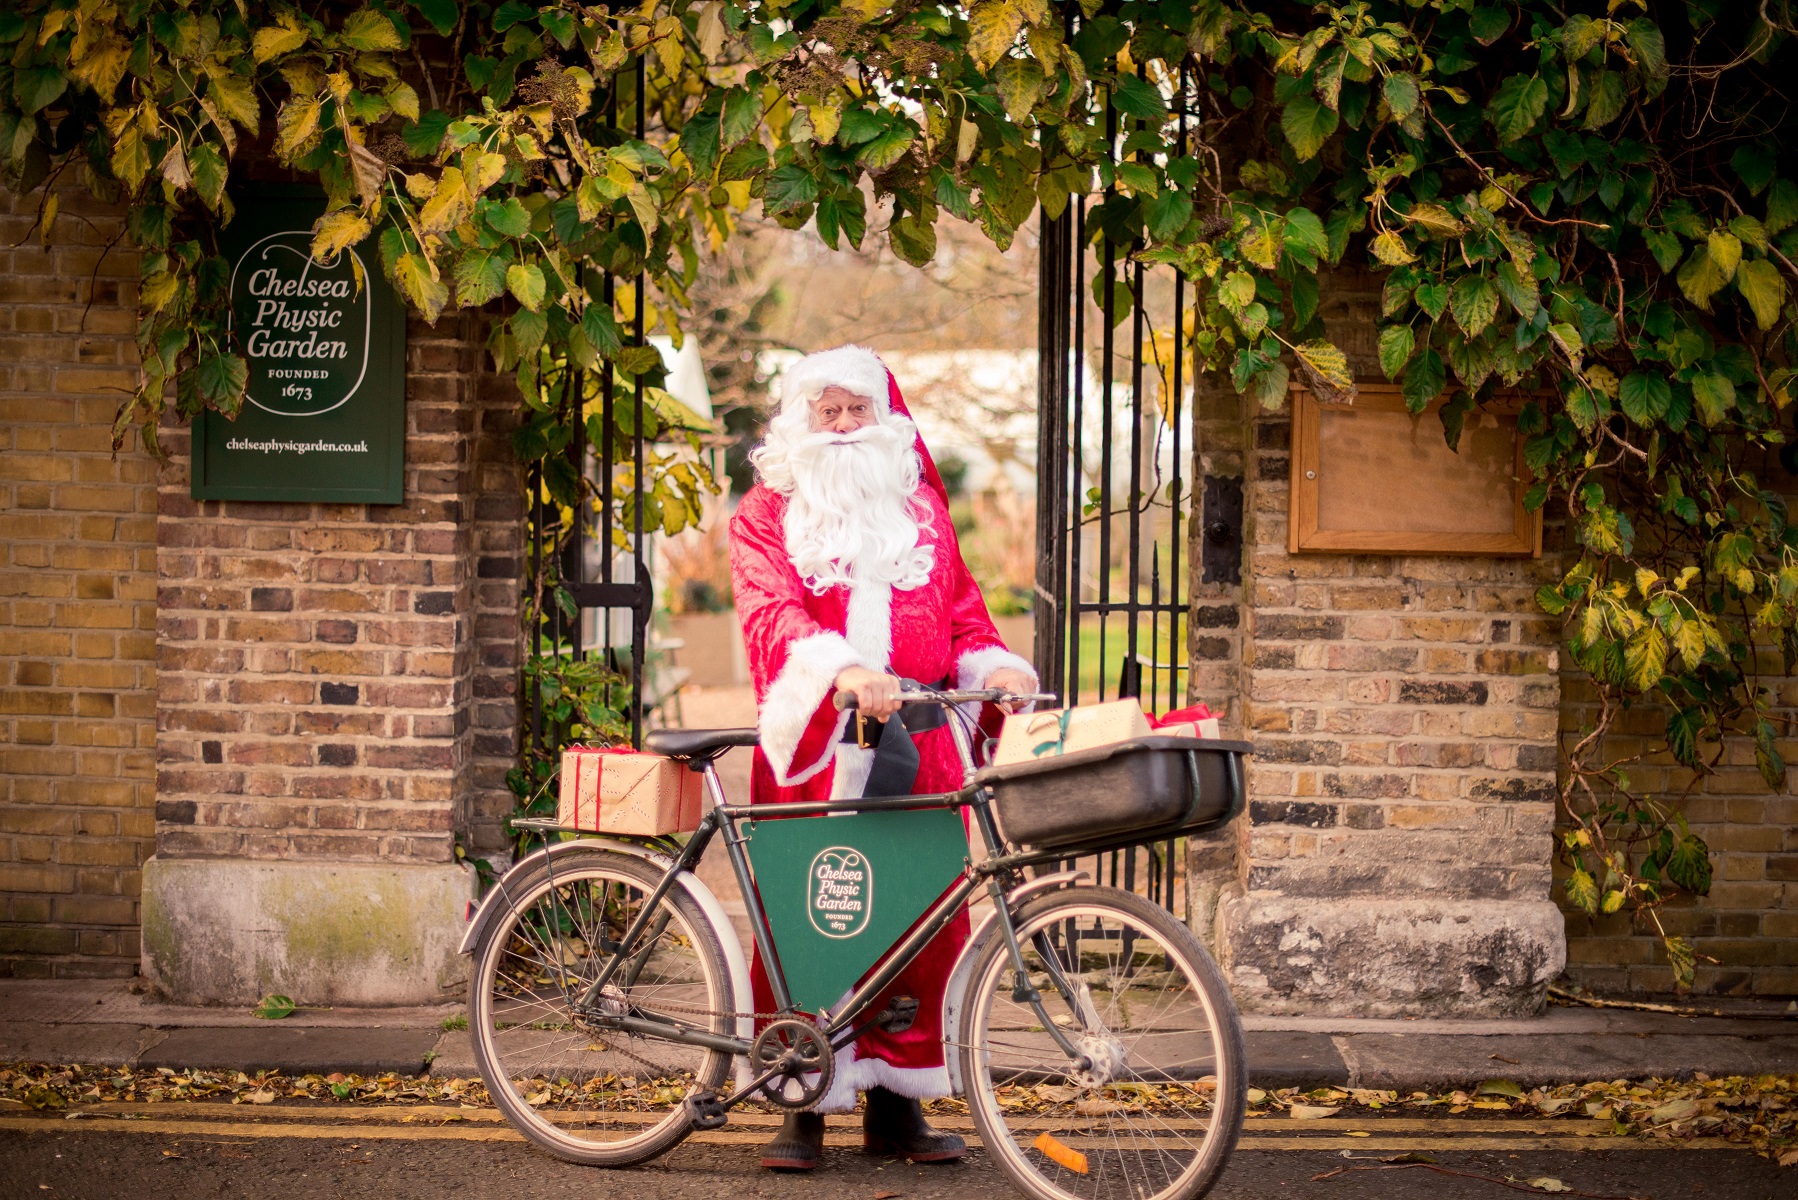 Father Christmas at Chelsea Physic Garden